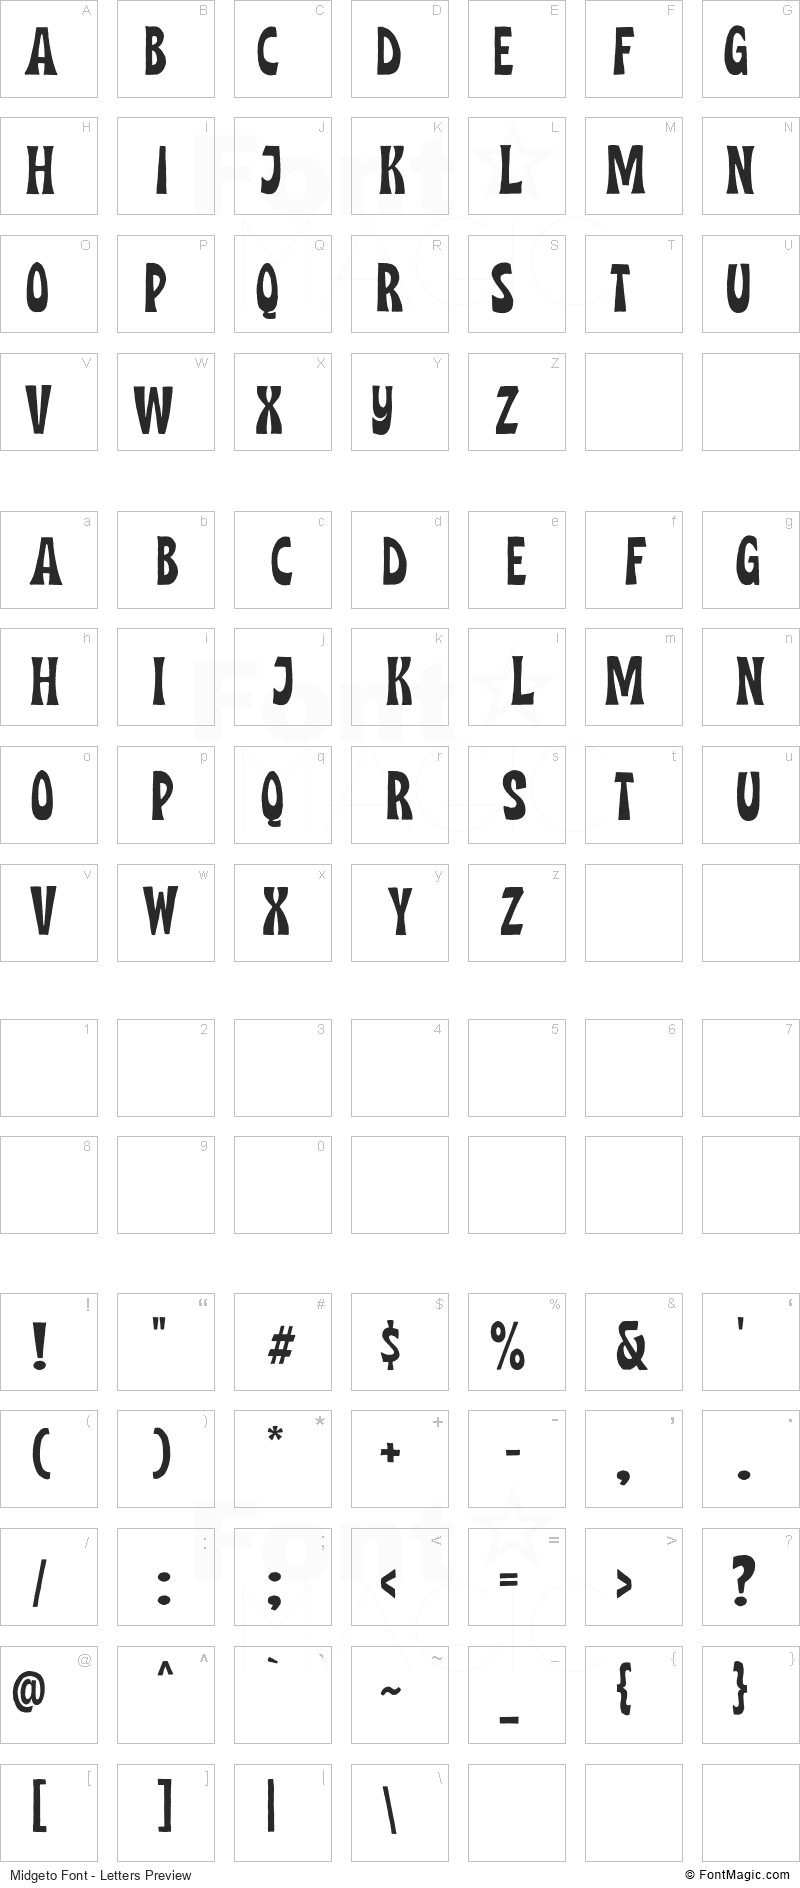 Midgeto Font - All Latters Preview Chart